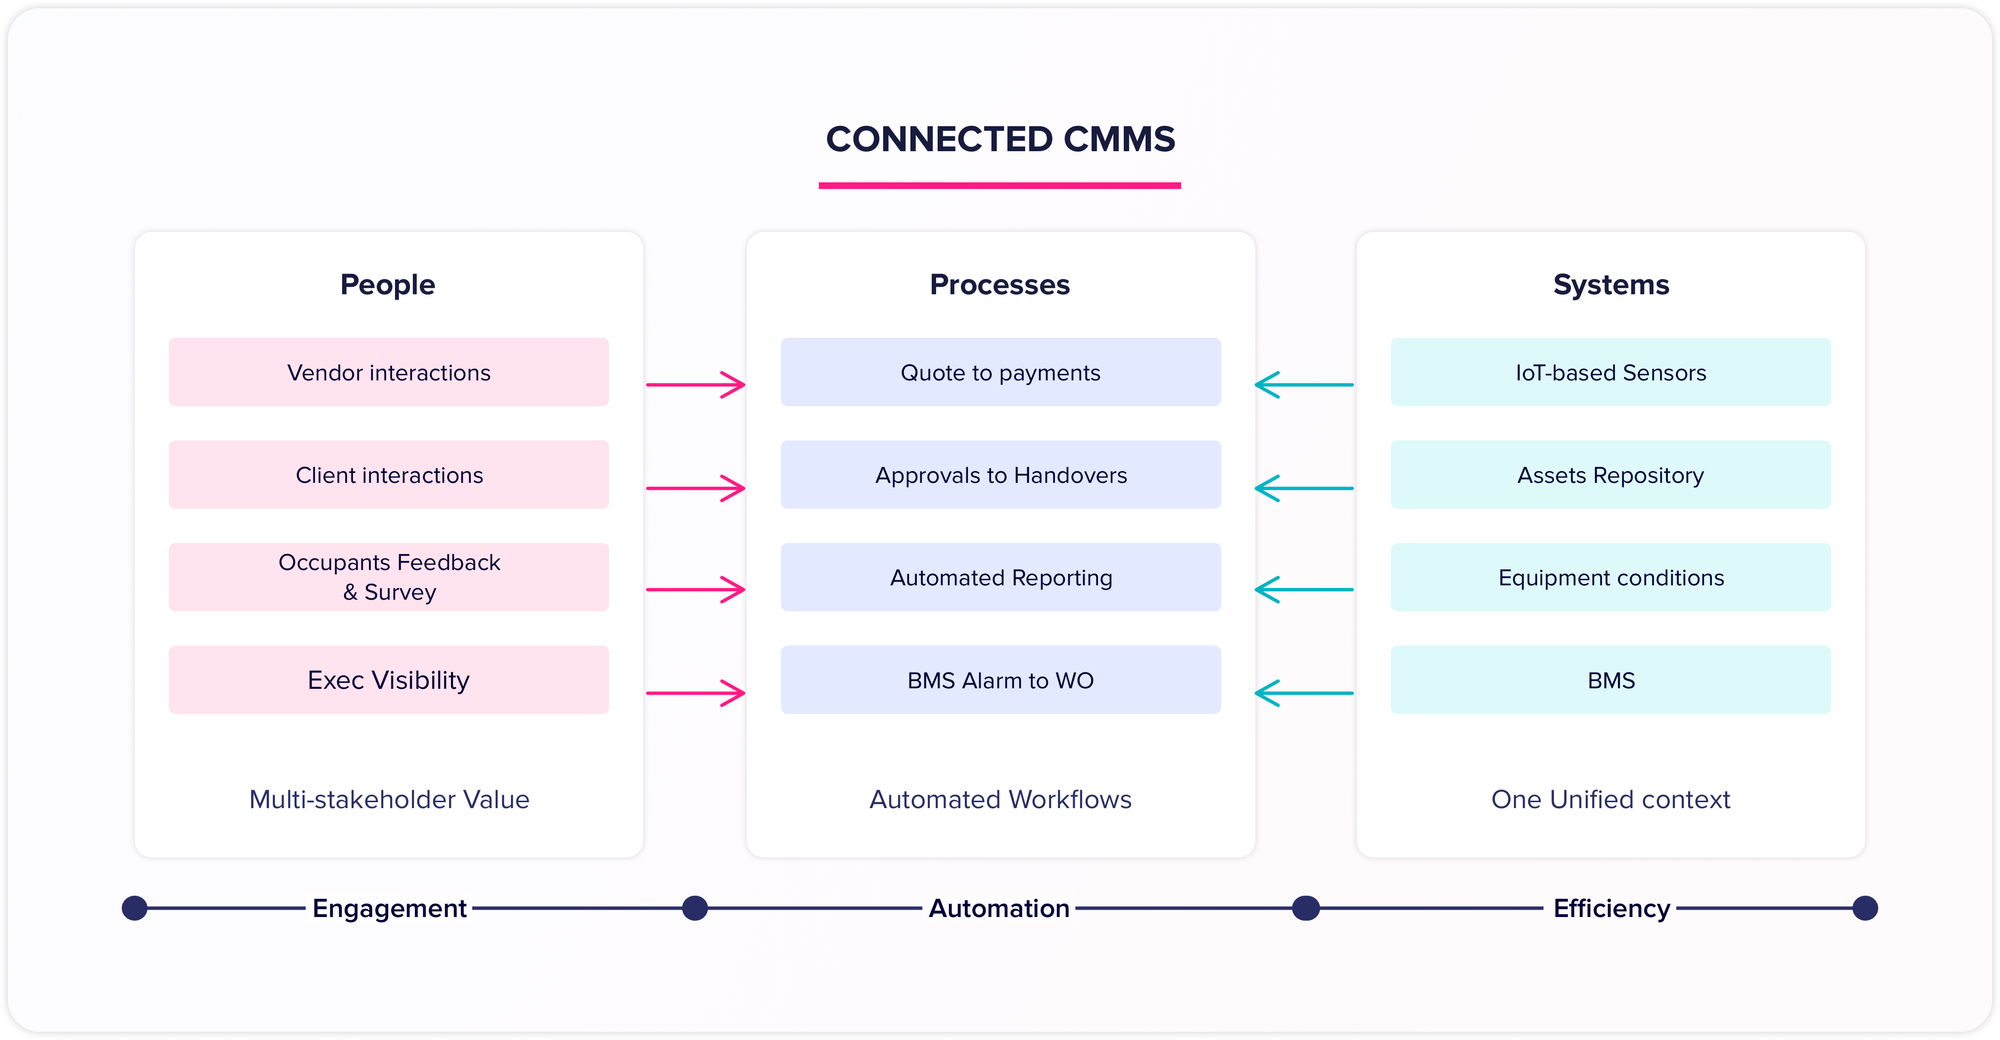 Facilio's Connected CMMS